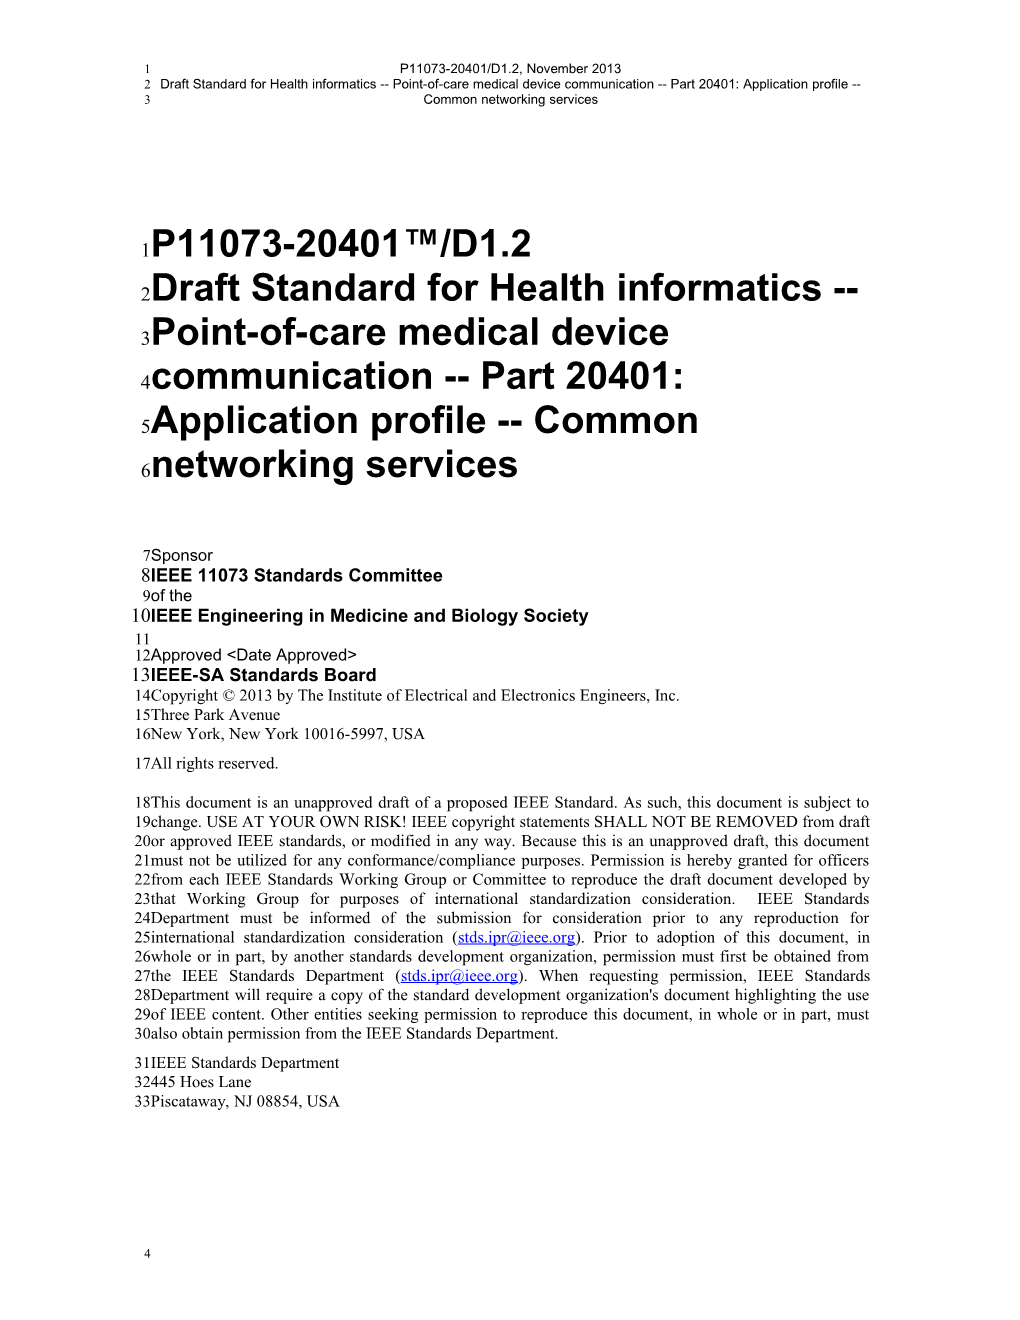 IEEE P11073-20401 Health Informatics Point-Of-Care Medical Device Communication Part 20401